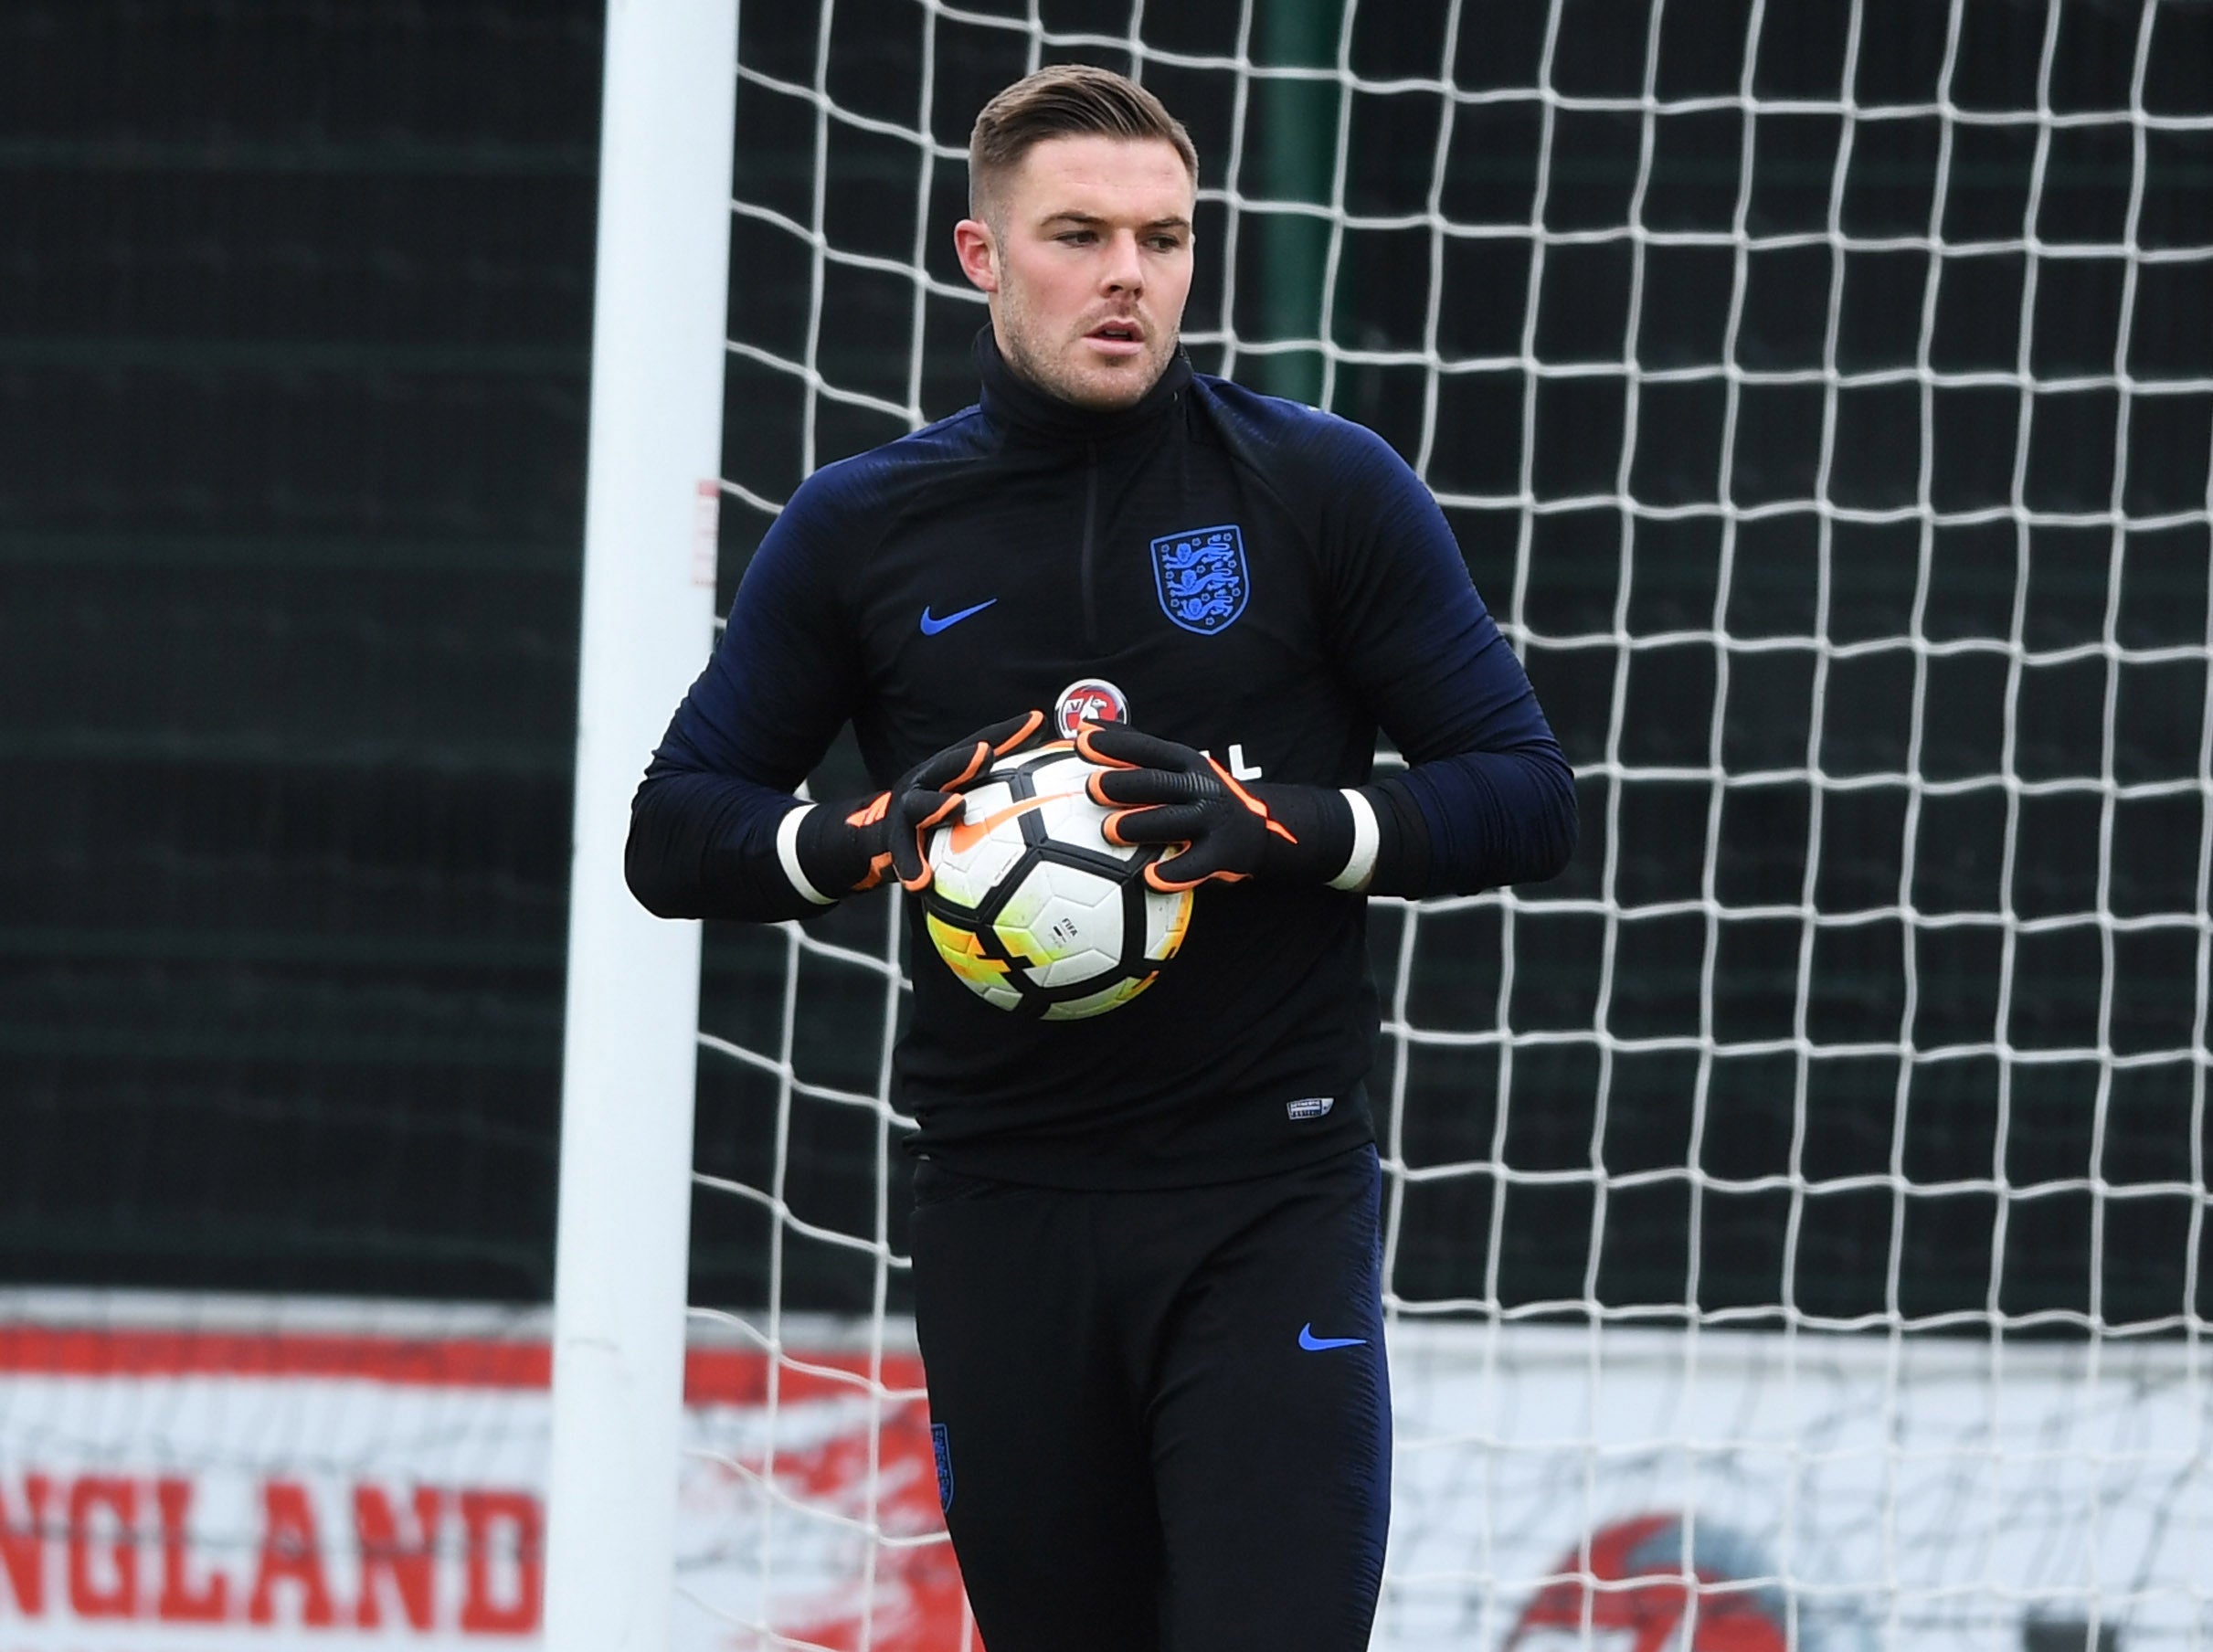 Butland is expected to go to Russia but faces stiff competition